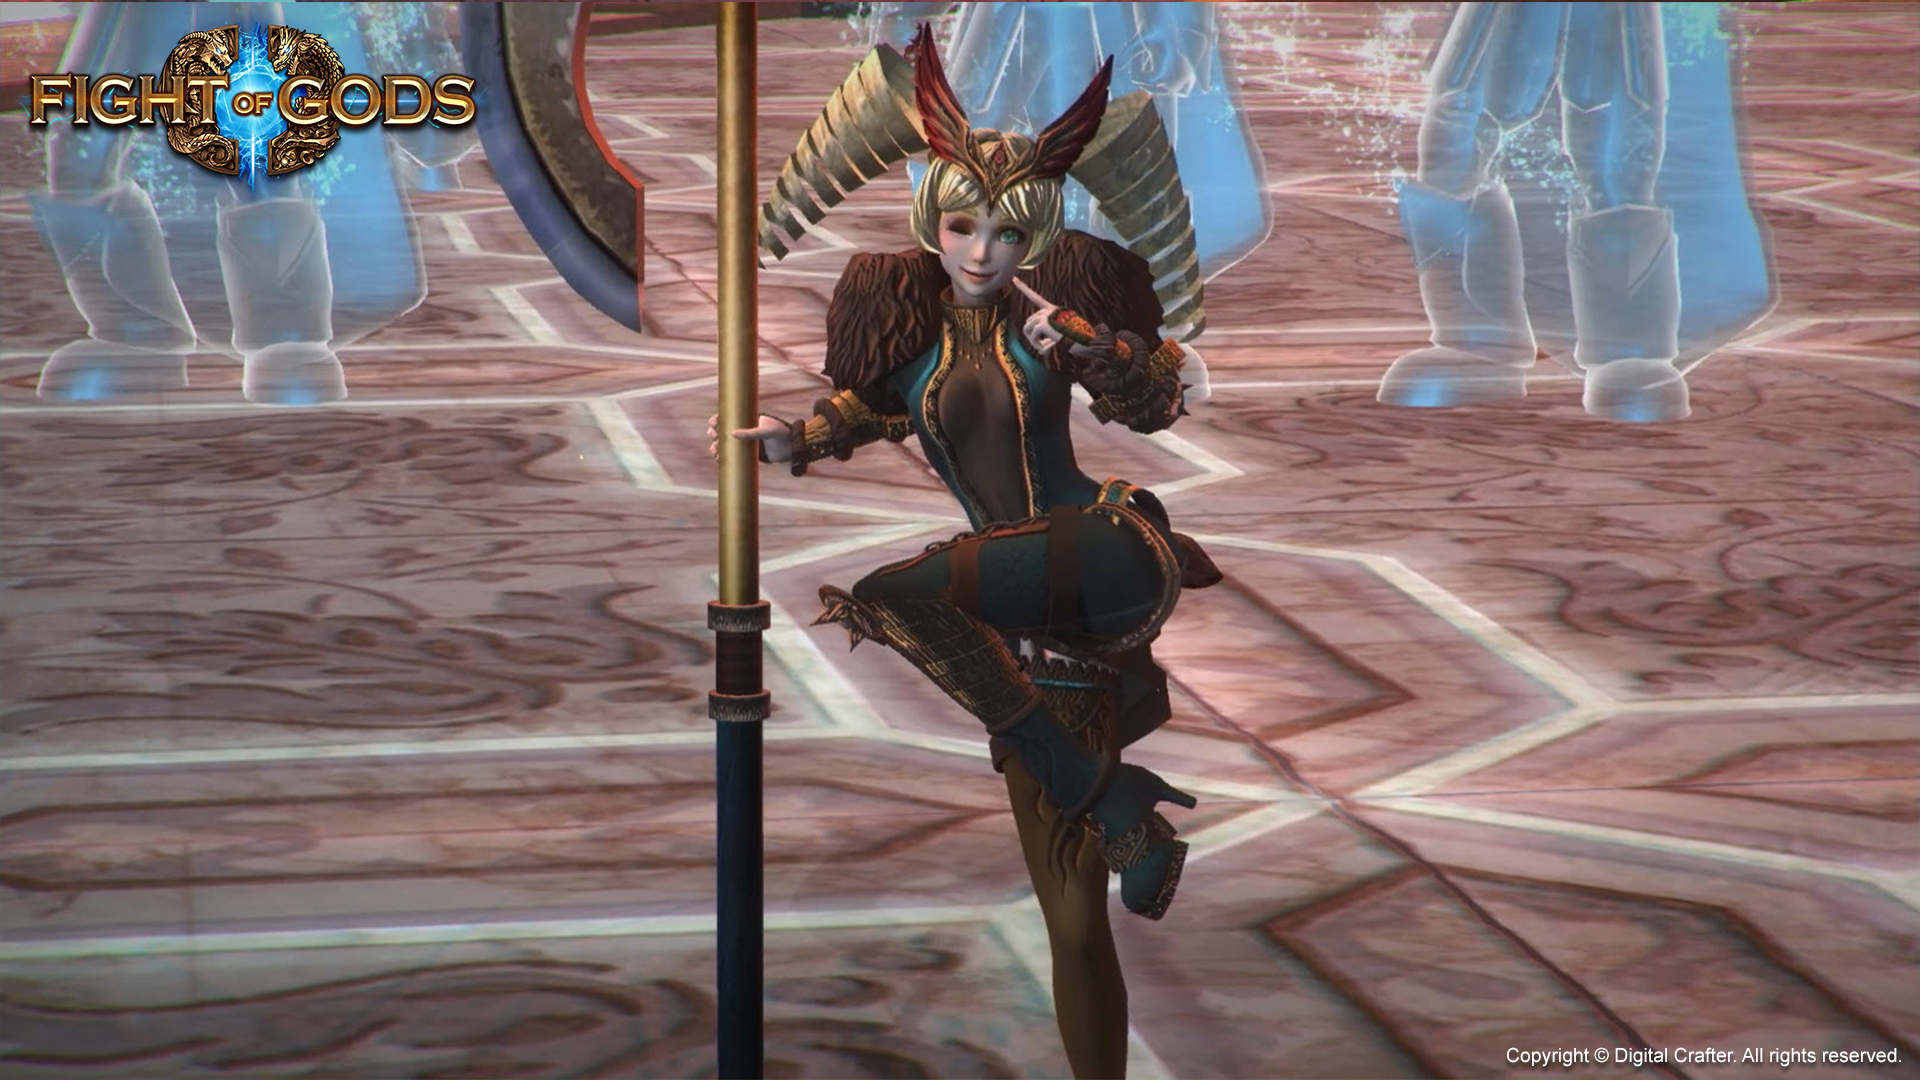 as well as releasing the freyja dlc were also pushing an update out to all fight of gods players containing a large number of tweaks and balances to the